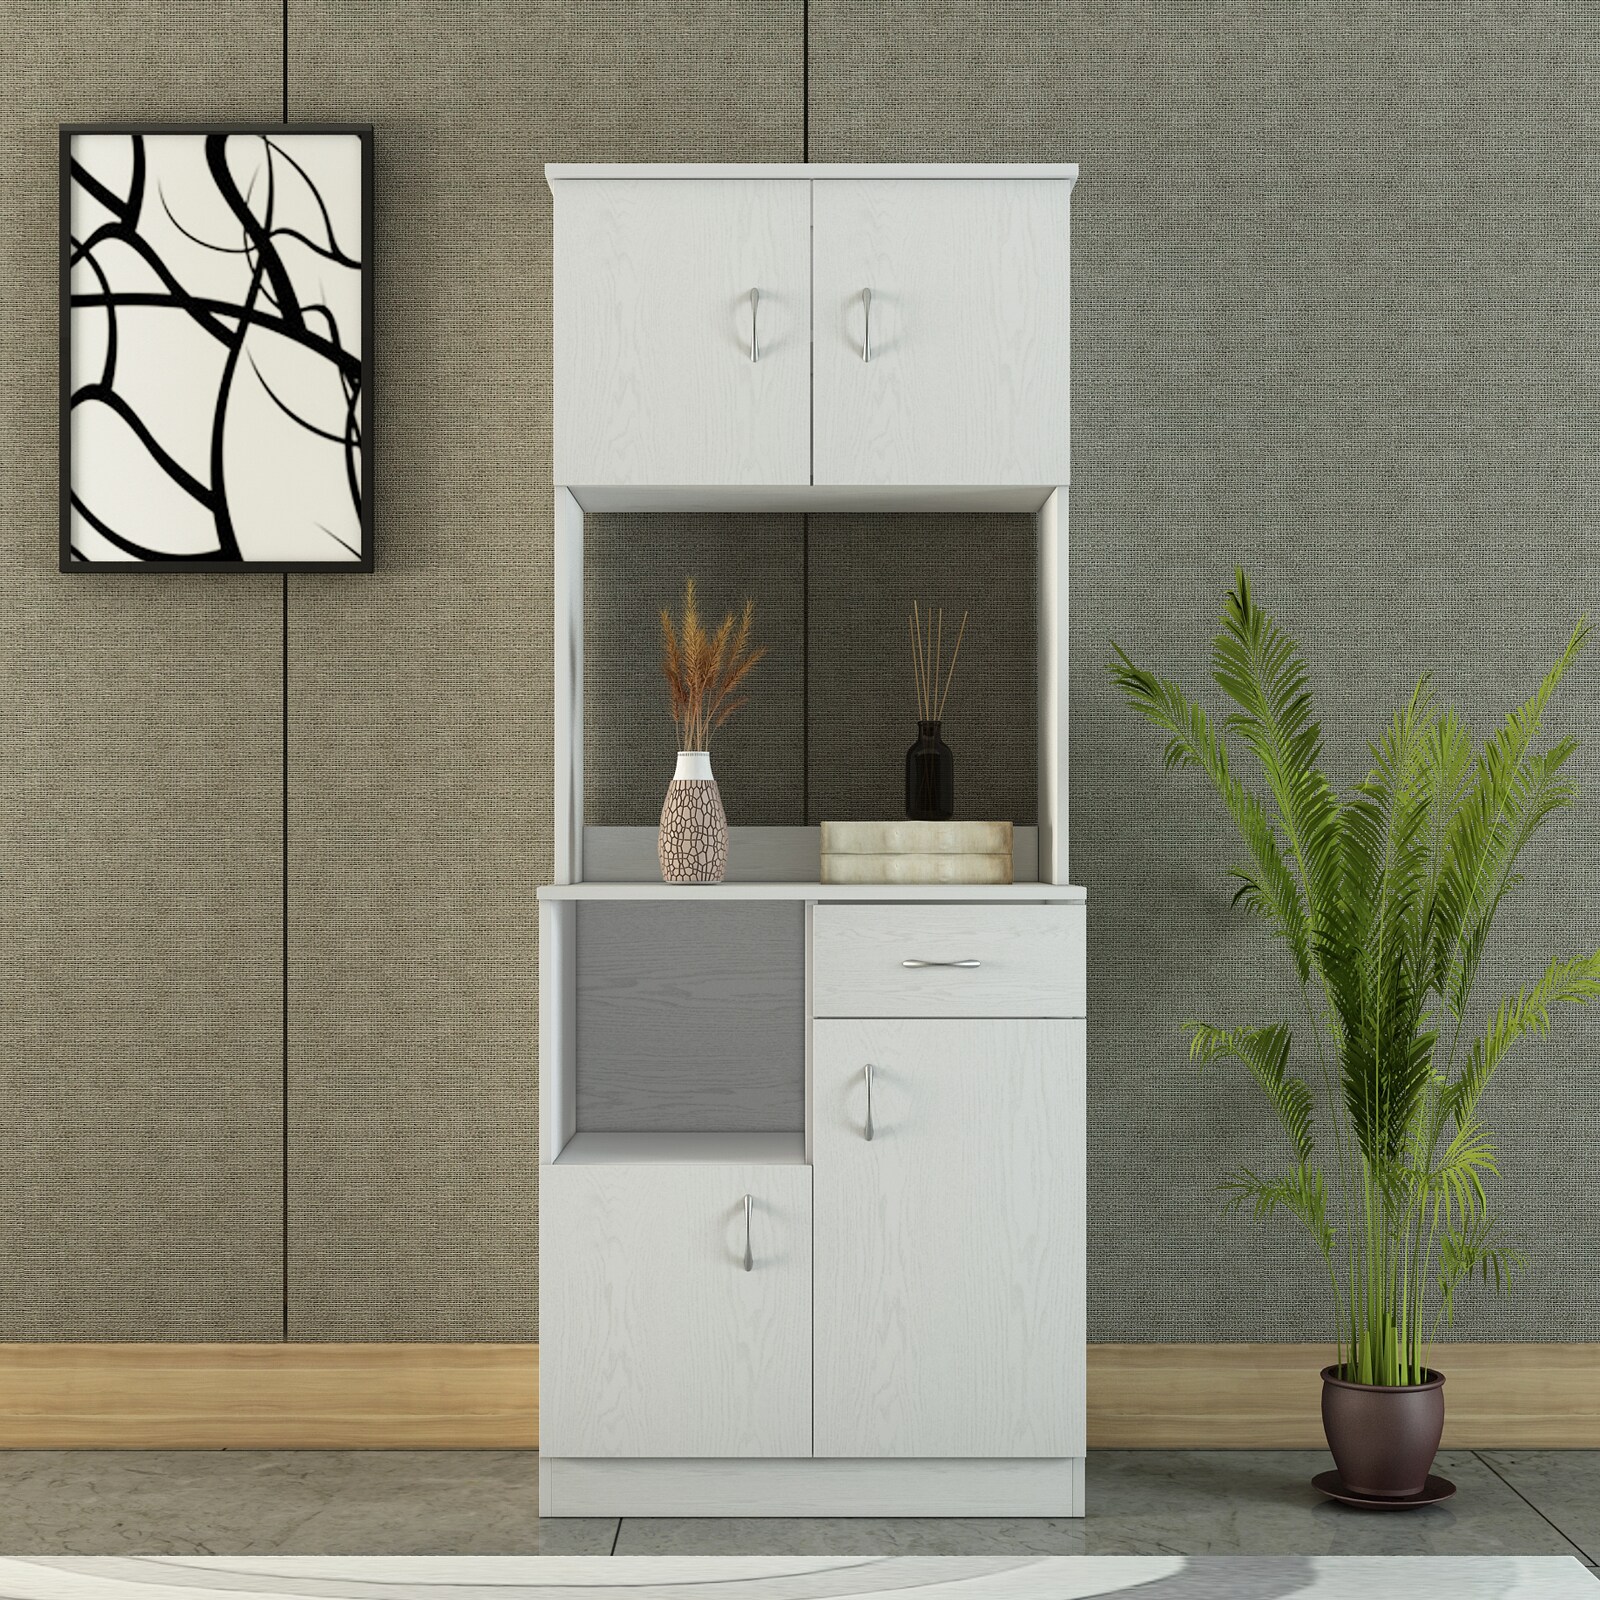 Mobile Utility Cabinet Nebula Gray Dimensions 89 lbs. 27W x 20D x 31H Weight 